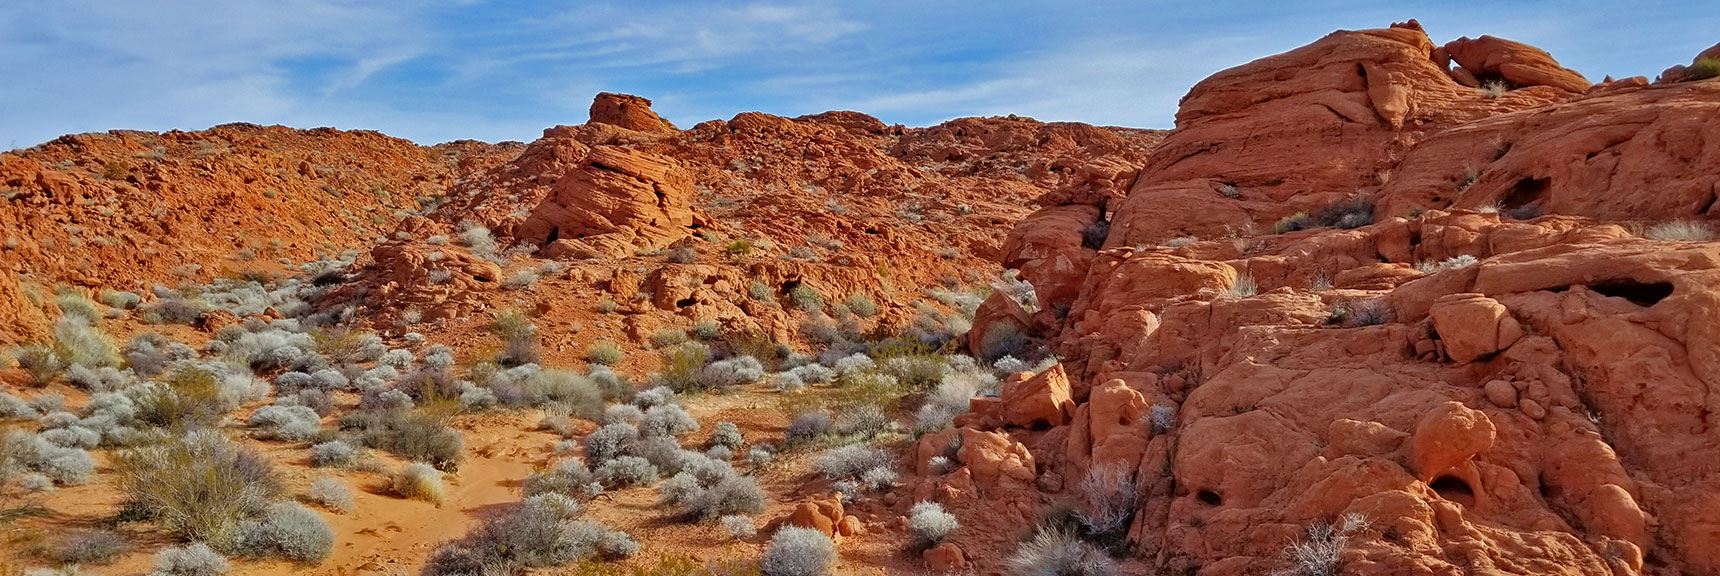 Navigating the Red Rock Hills South of Elephant Rock Loop in Valley of Fire State Park, Nevada